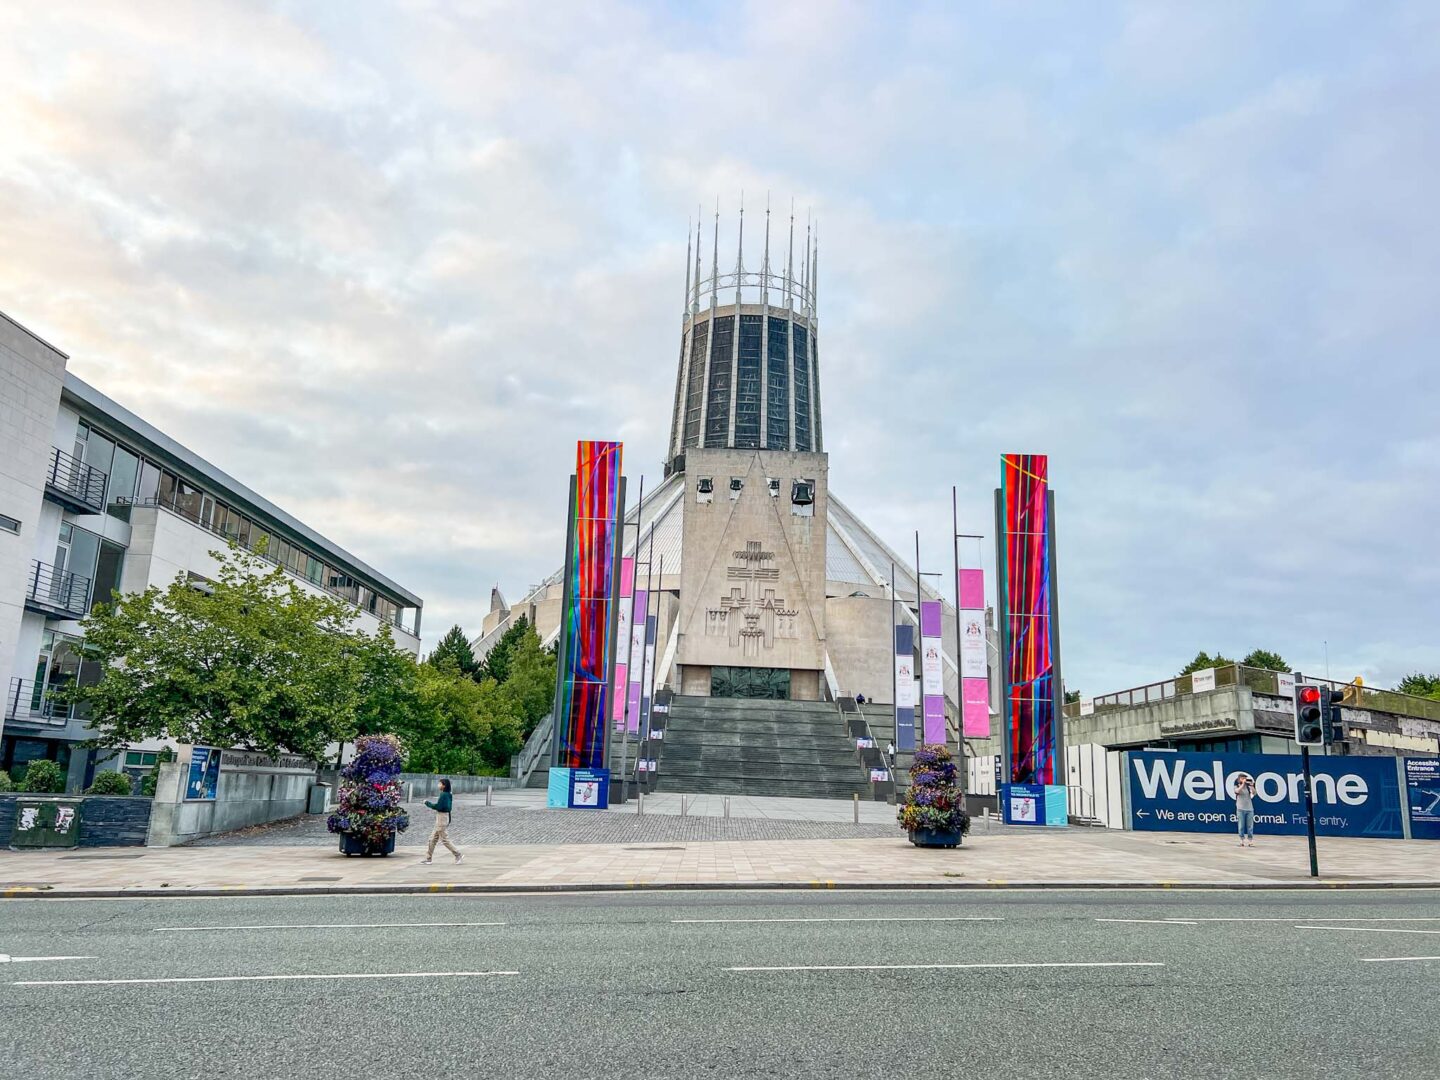 Weekend in Liverpool, Liverpool Metropolitan Cathedral from the outside